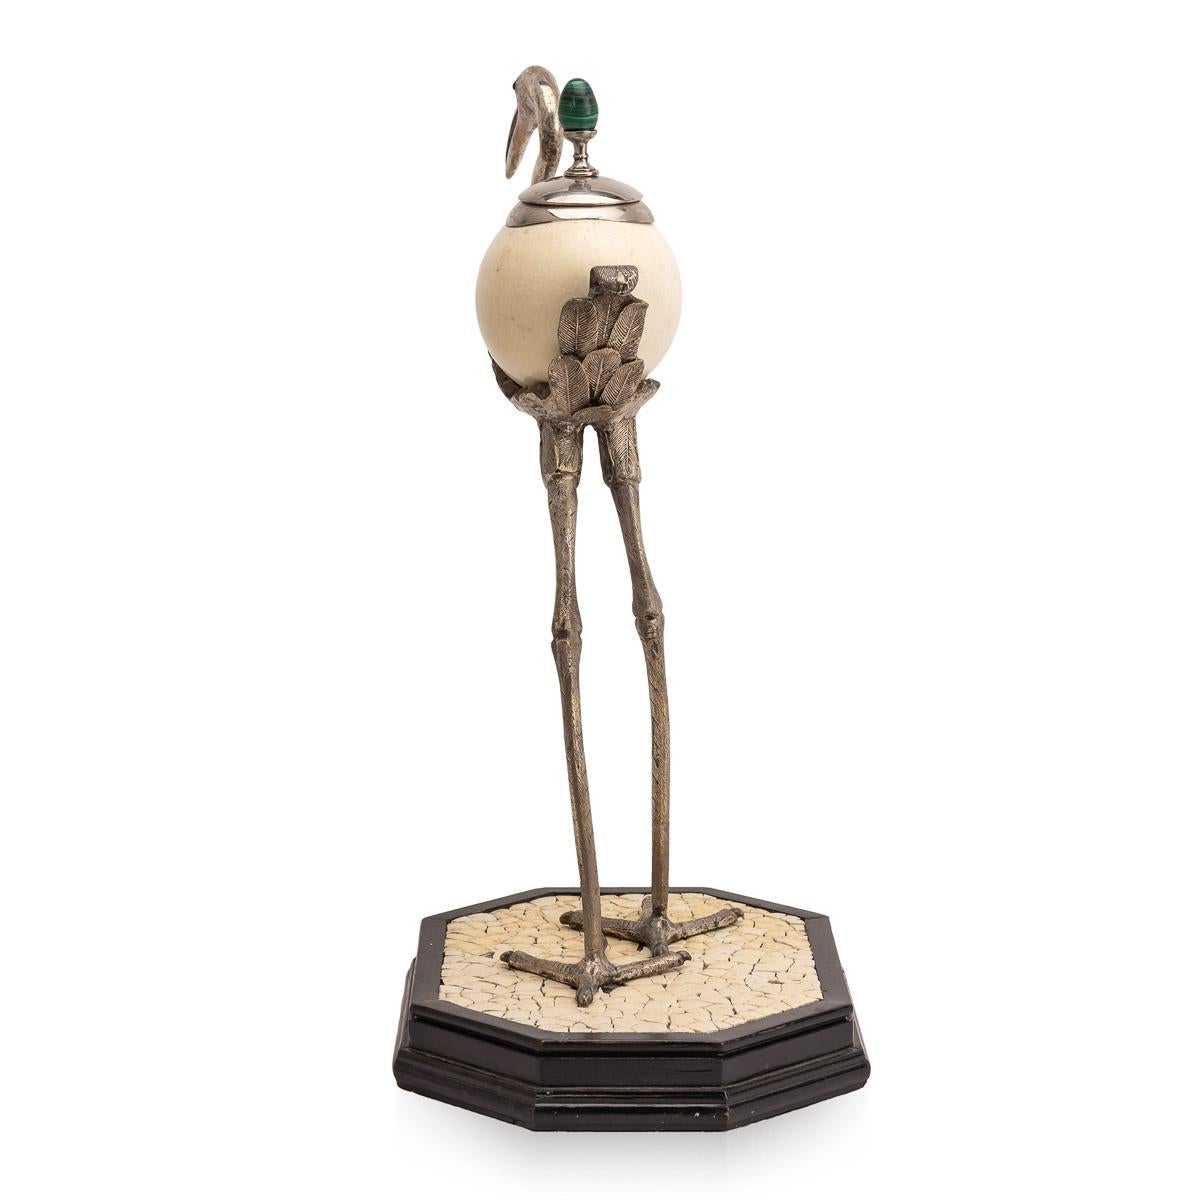 English Anthony Redmile Ostrich Egg Box Mounted on Silver Plated Crane, circa 1970